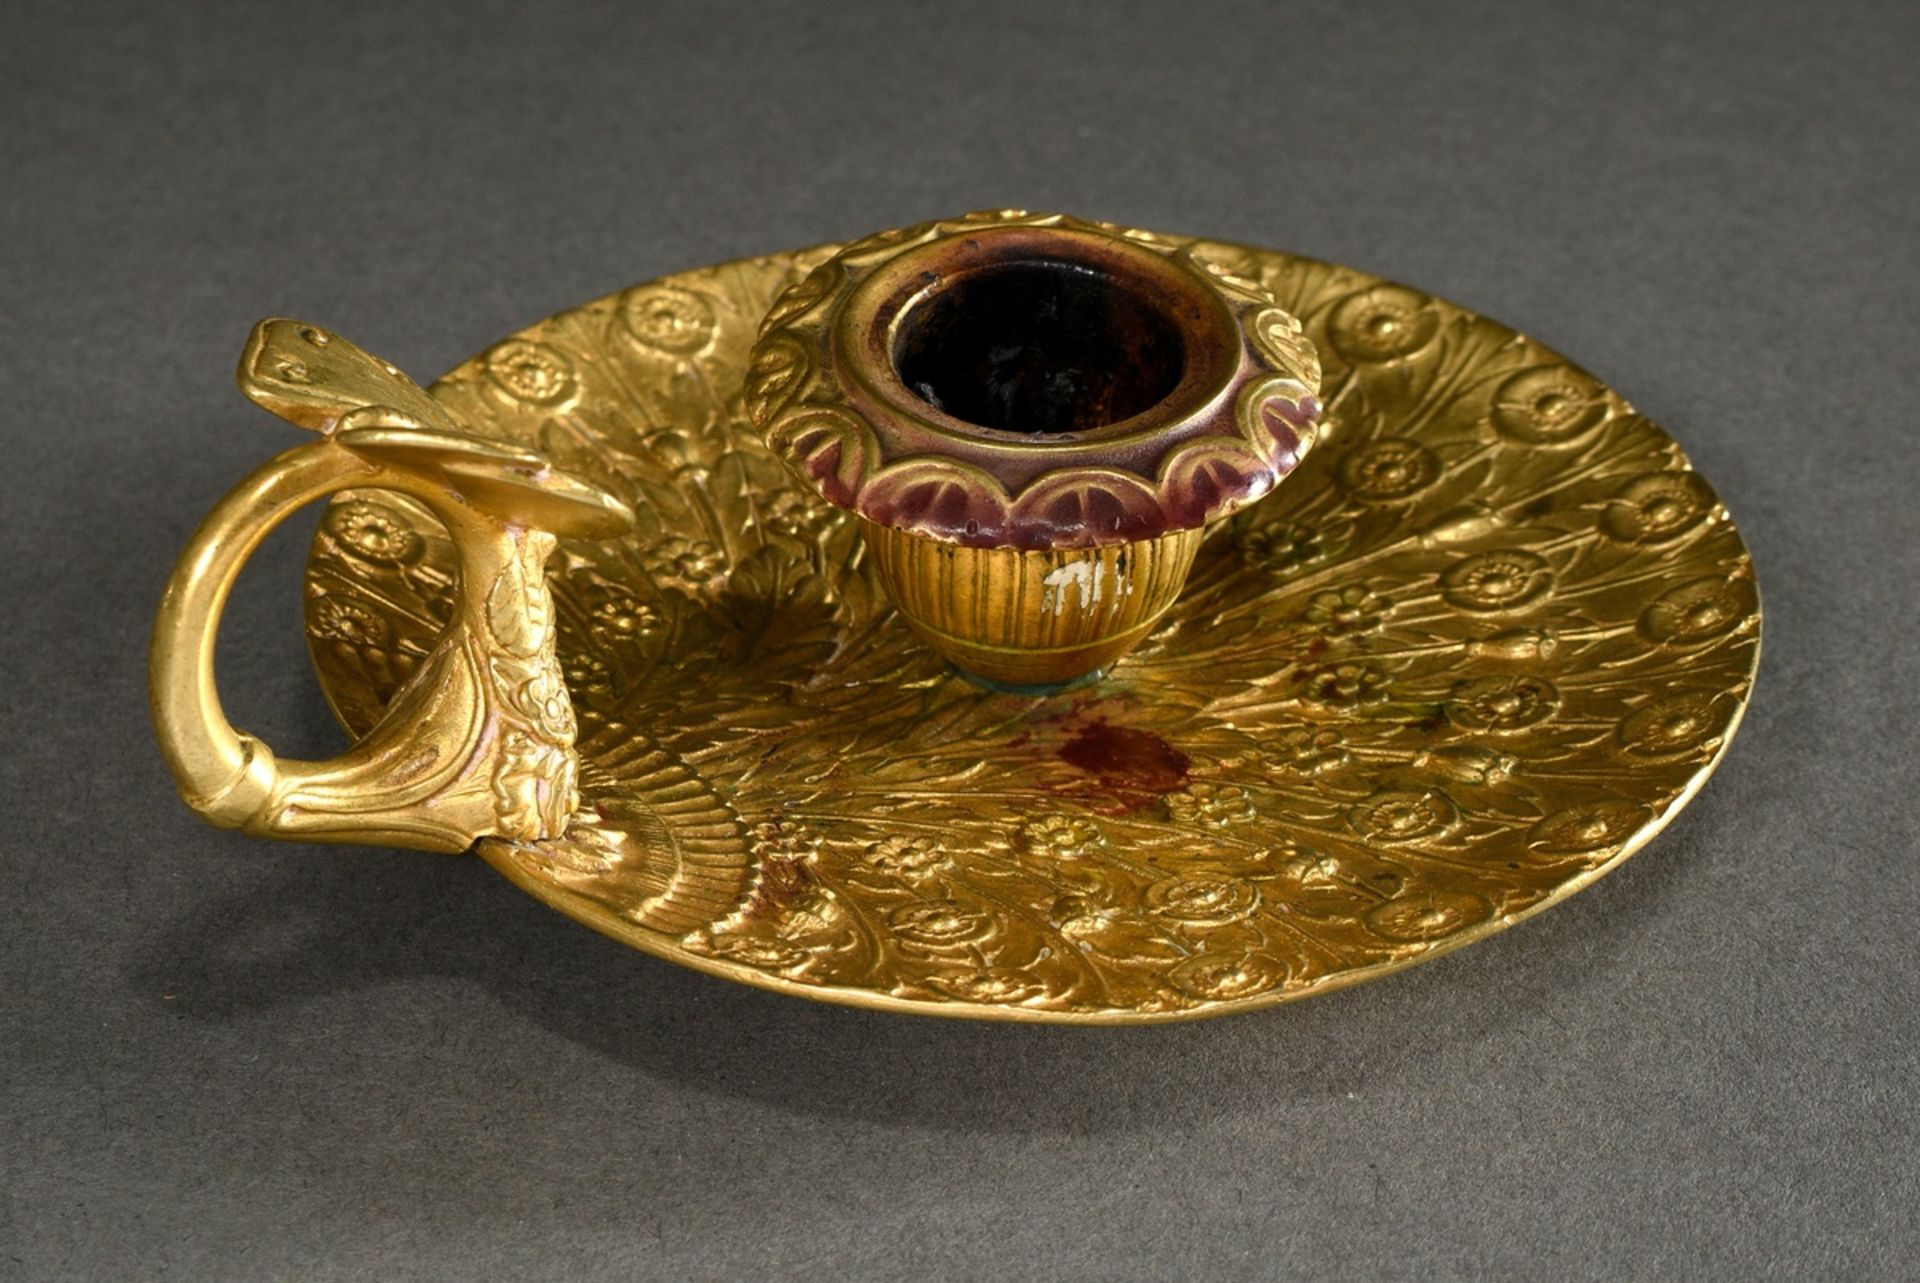 Empire hand candlestick with poppy decoration on the plate and sculpted butterfly thumb rest, gilt  - Image 2 of 4